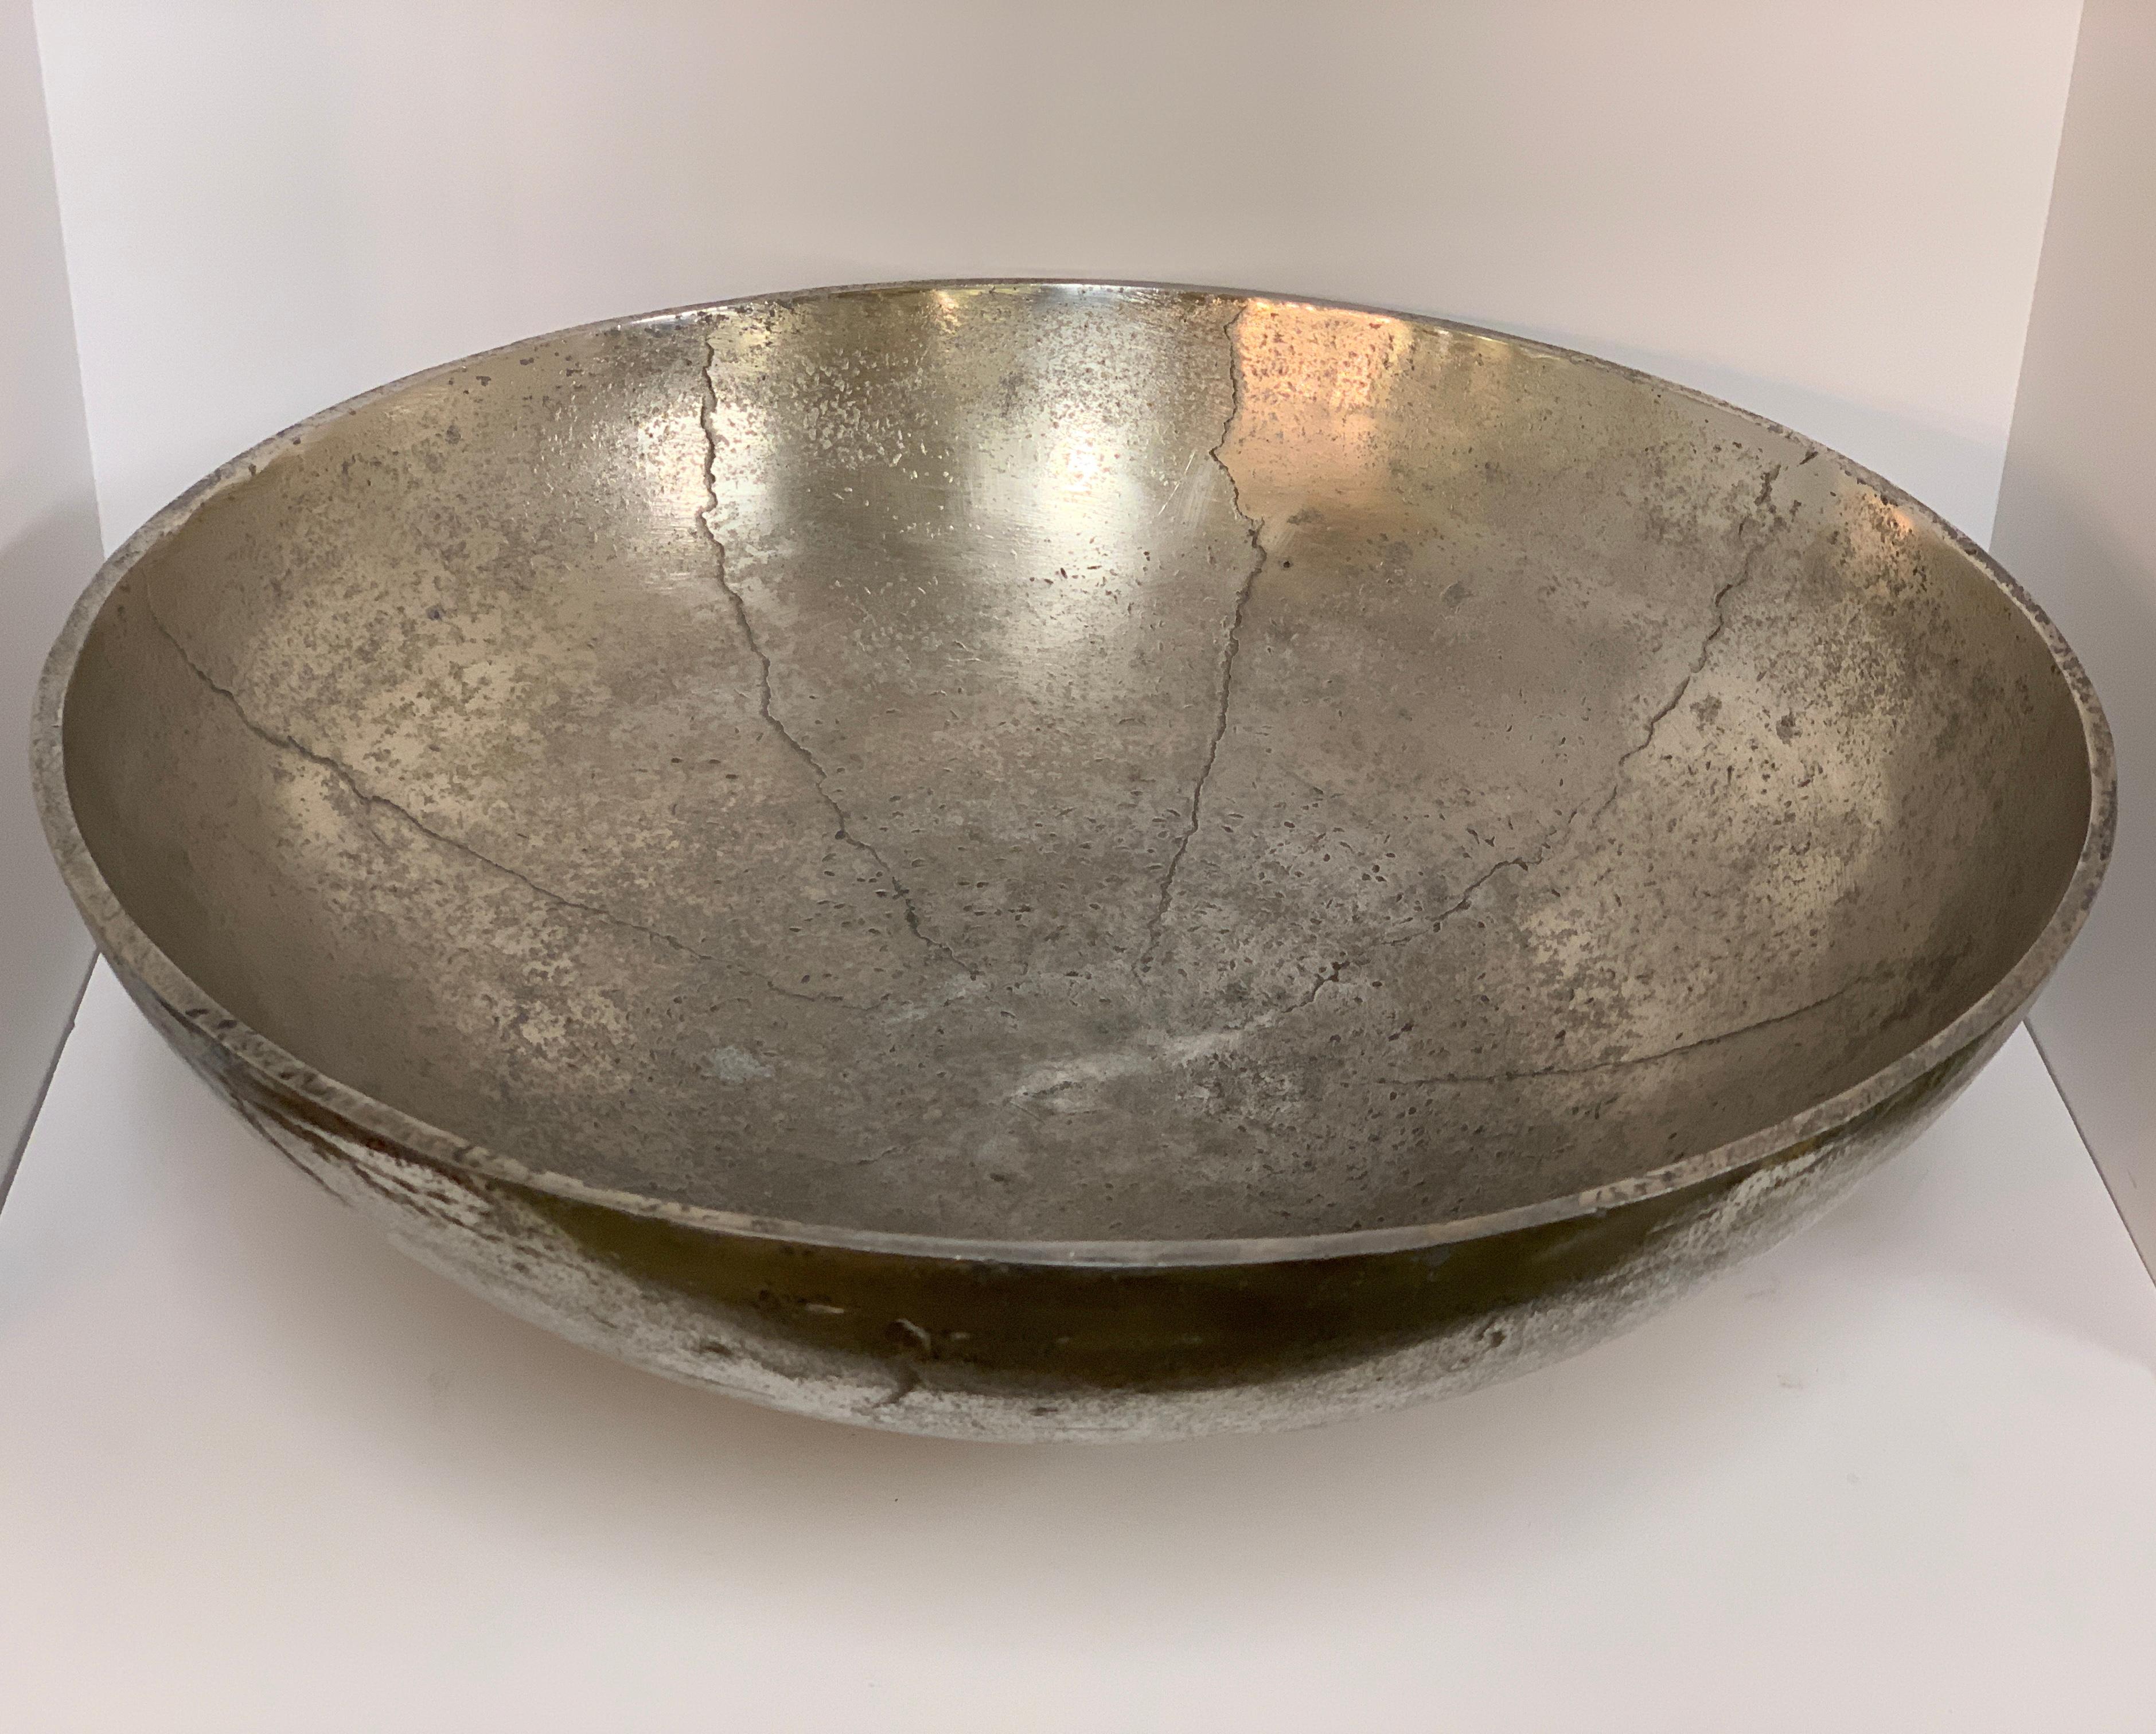 A quite impressive and massive large bowl we had a base made for. We believe the metal may be some of silver plate as it has a silver smell when rubbed. It could be pewter as well the way it is cracked during the casting. In any event a beautiful